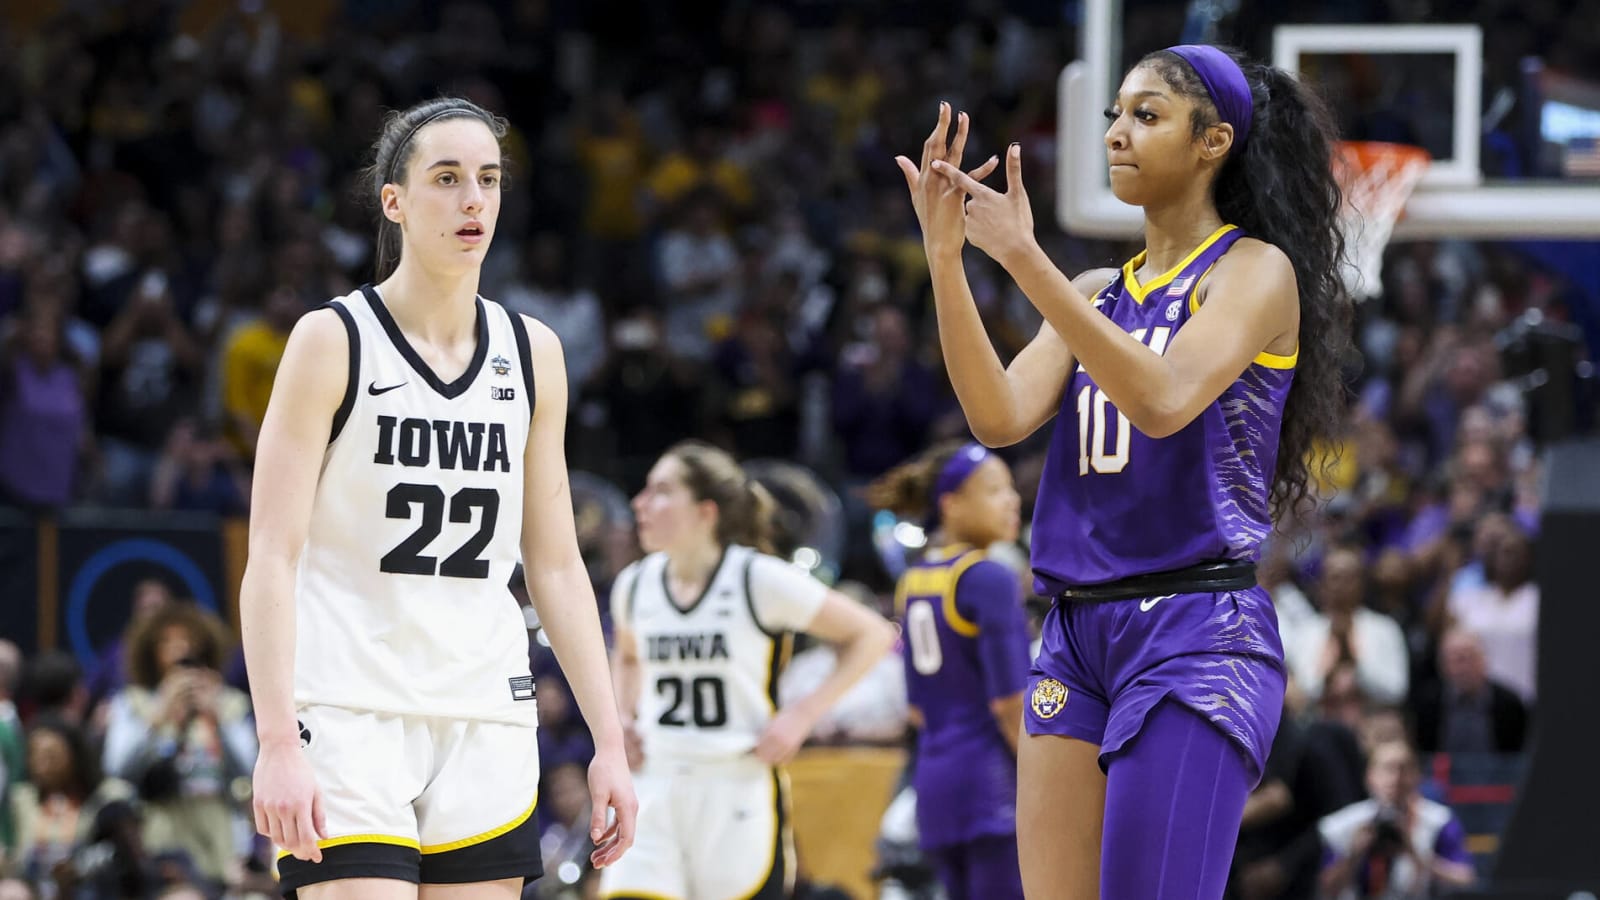 LSU vs. Iowa and the NCAAW's great explosion